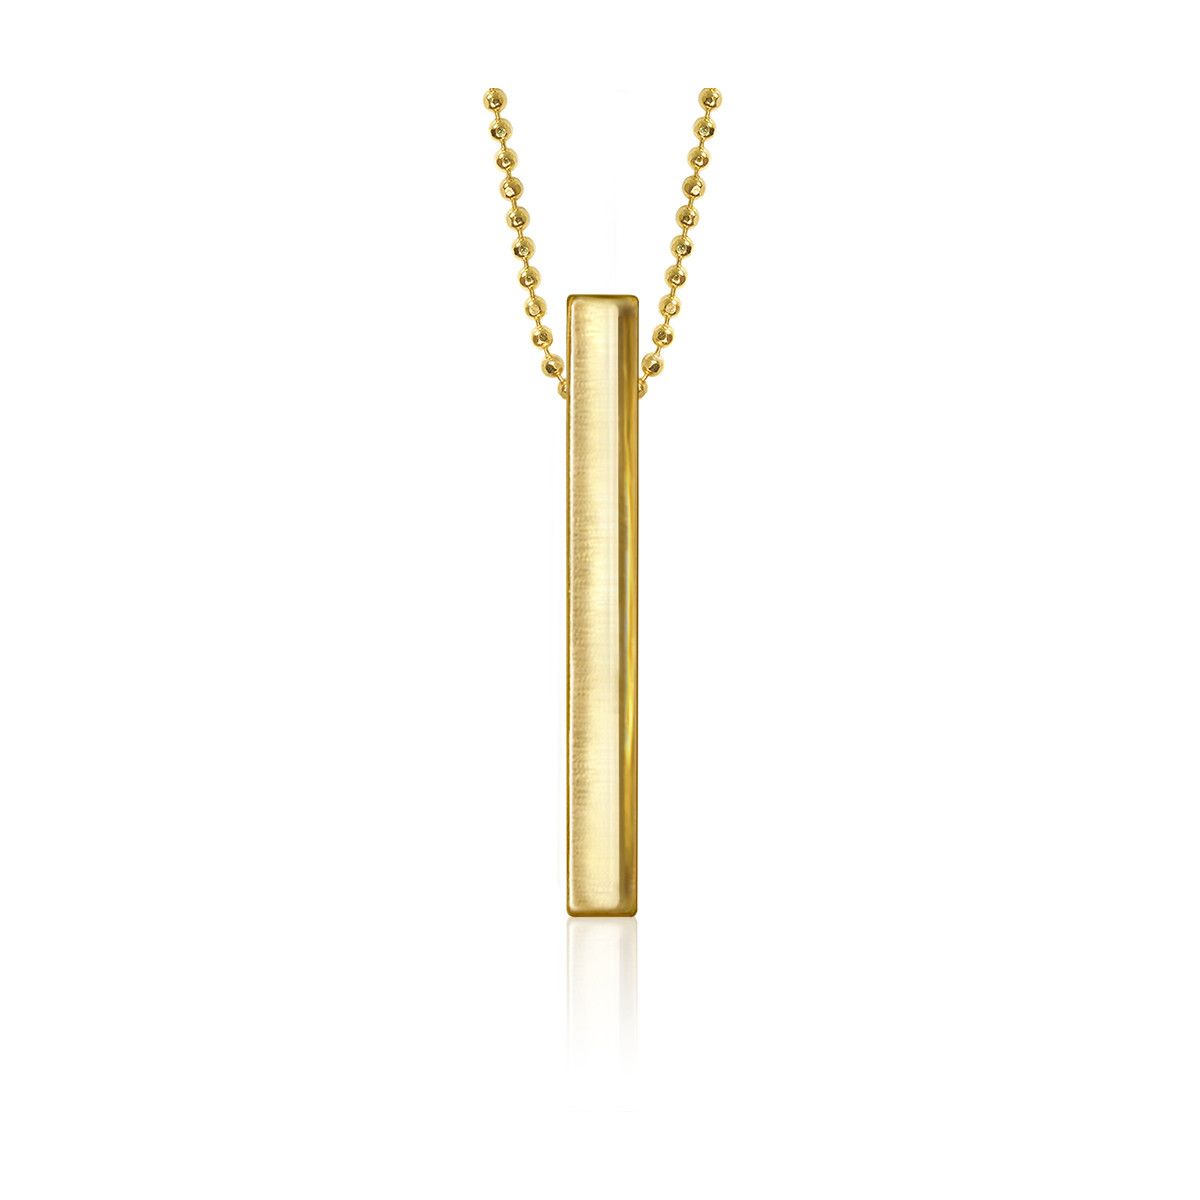 Alex Woo Beaded 16 Chain Necklace in 14K Gold - Yellow Gold